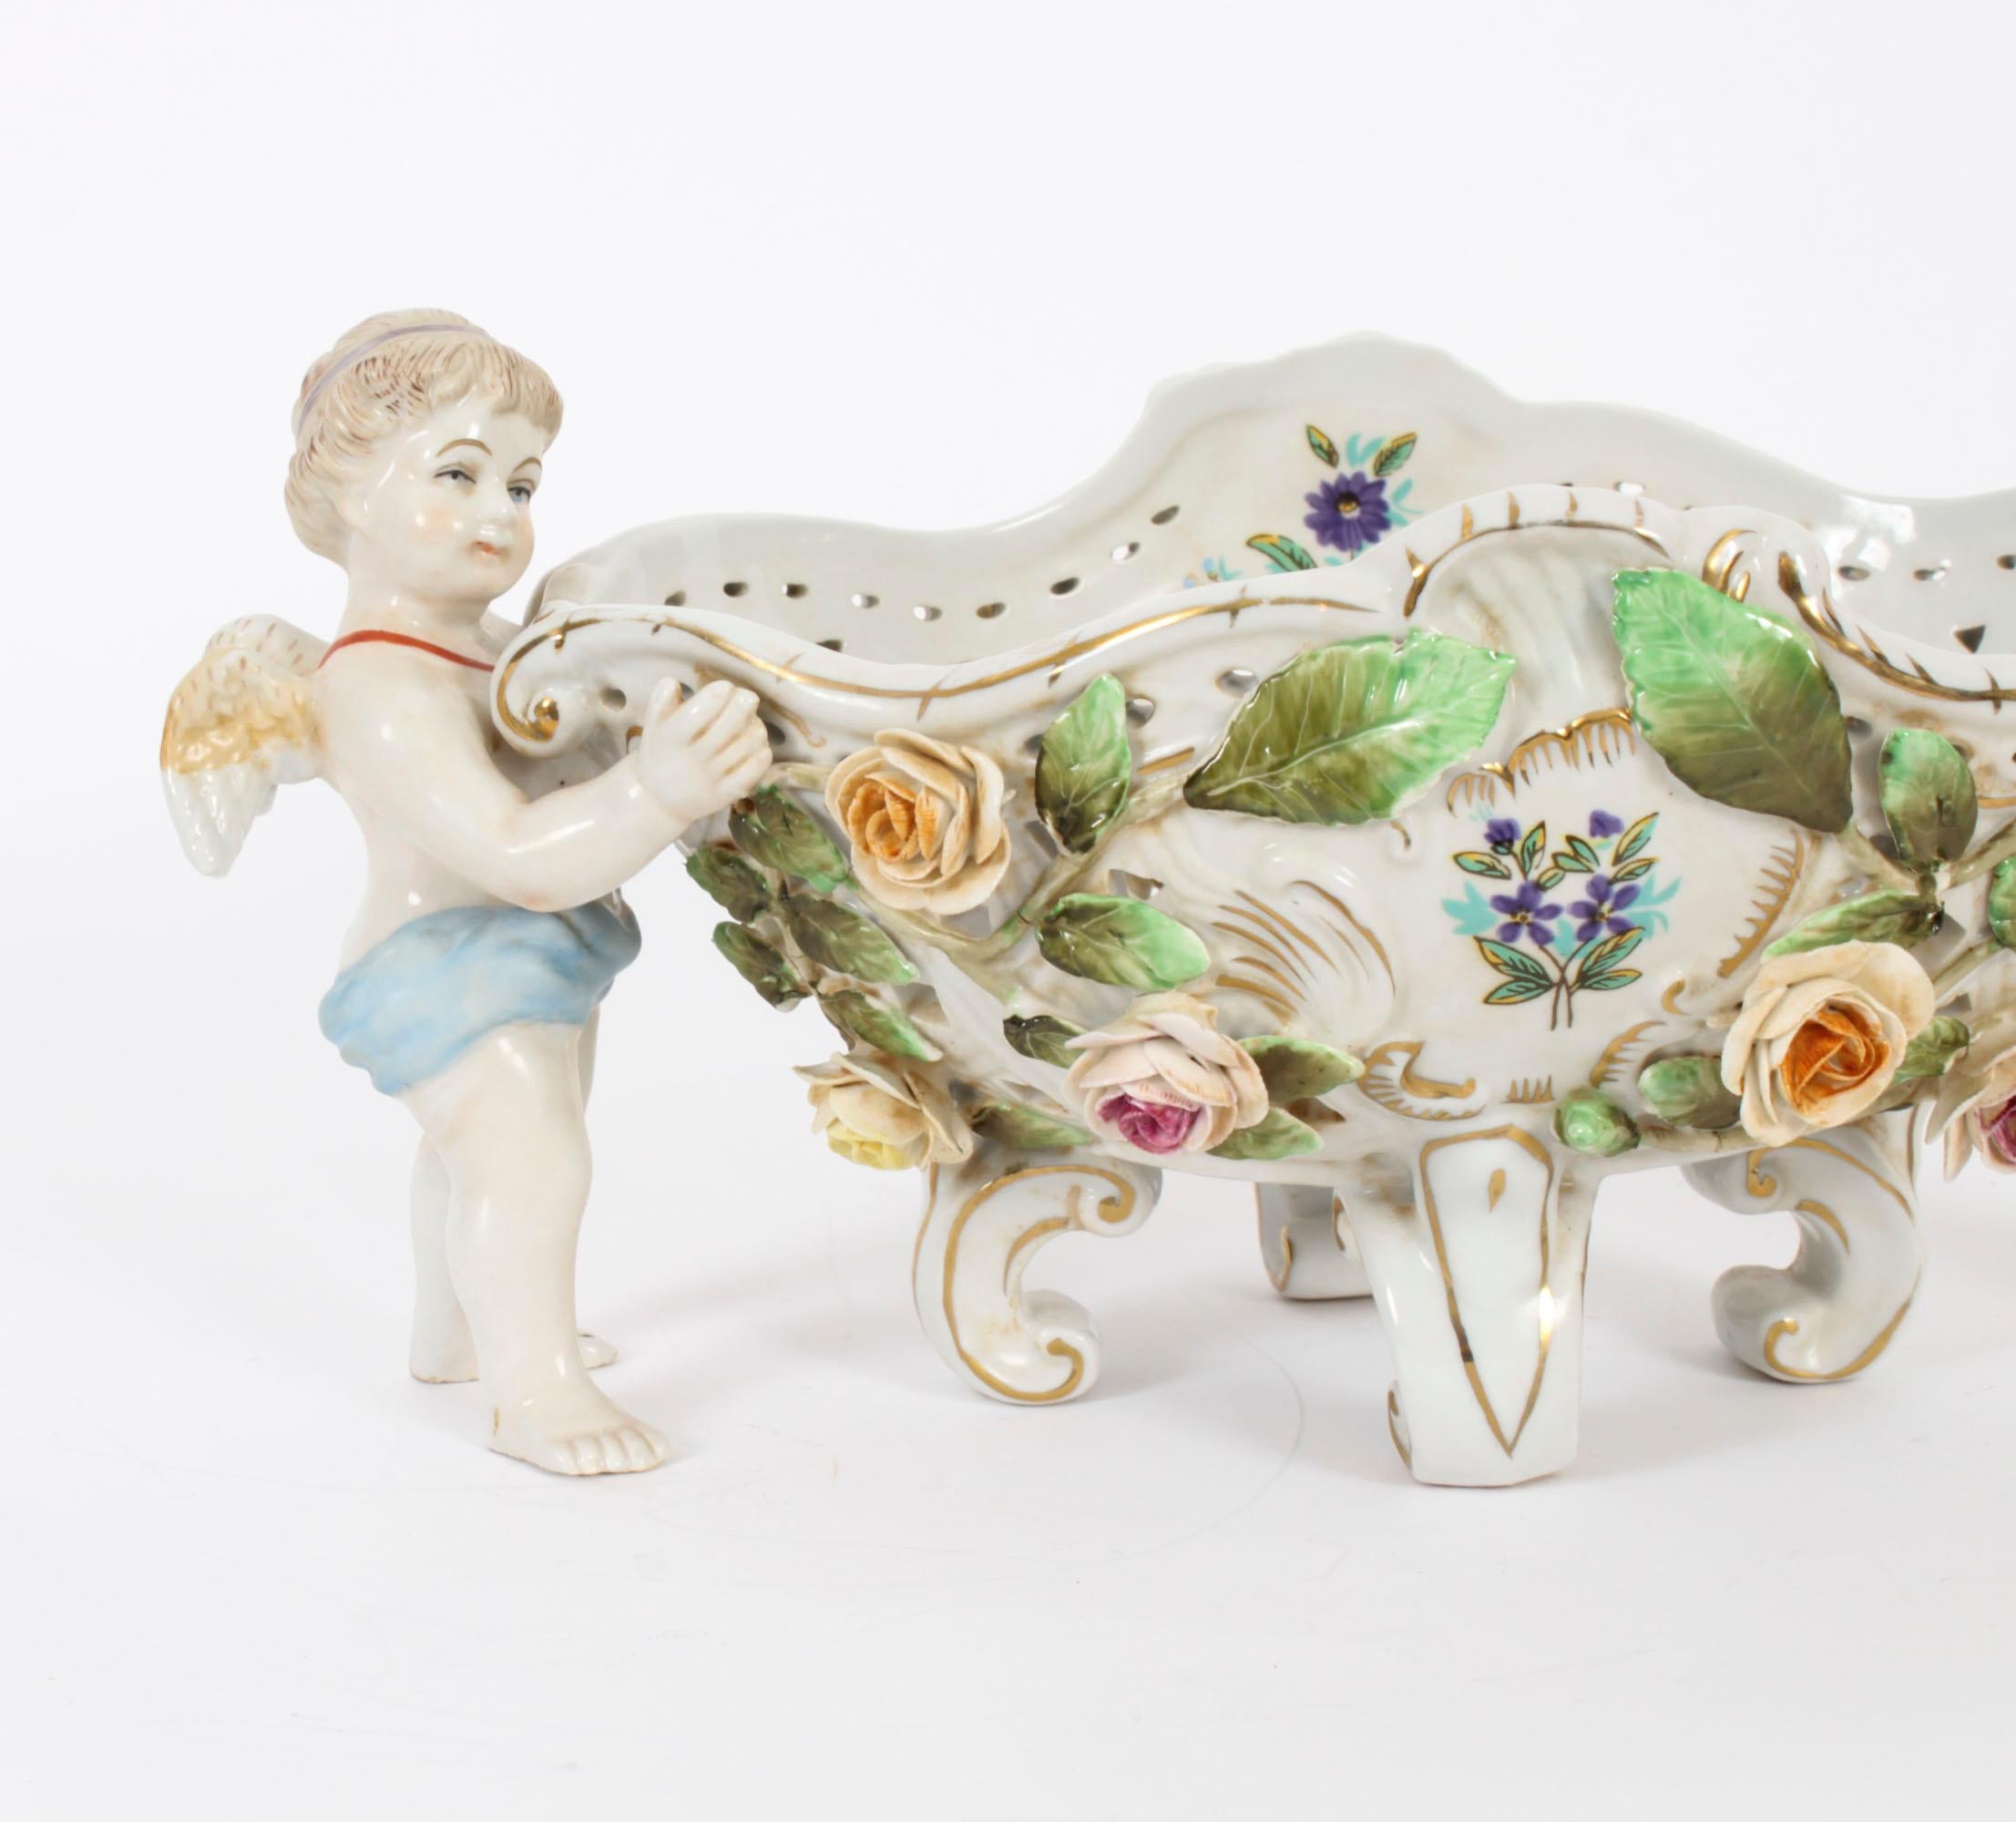 This is a beautiful and ornate Vintage Dresden Revival porcelain centrepiece, late 20th century in date.

The centrepiece features a winged cherub on each side  holding an oval pierced basket-like dish with hand painted roses and foliate decoration